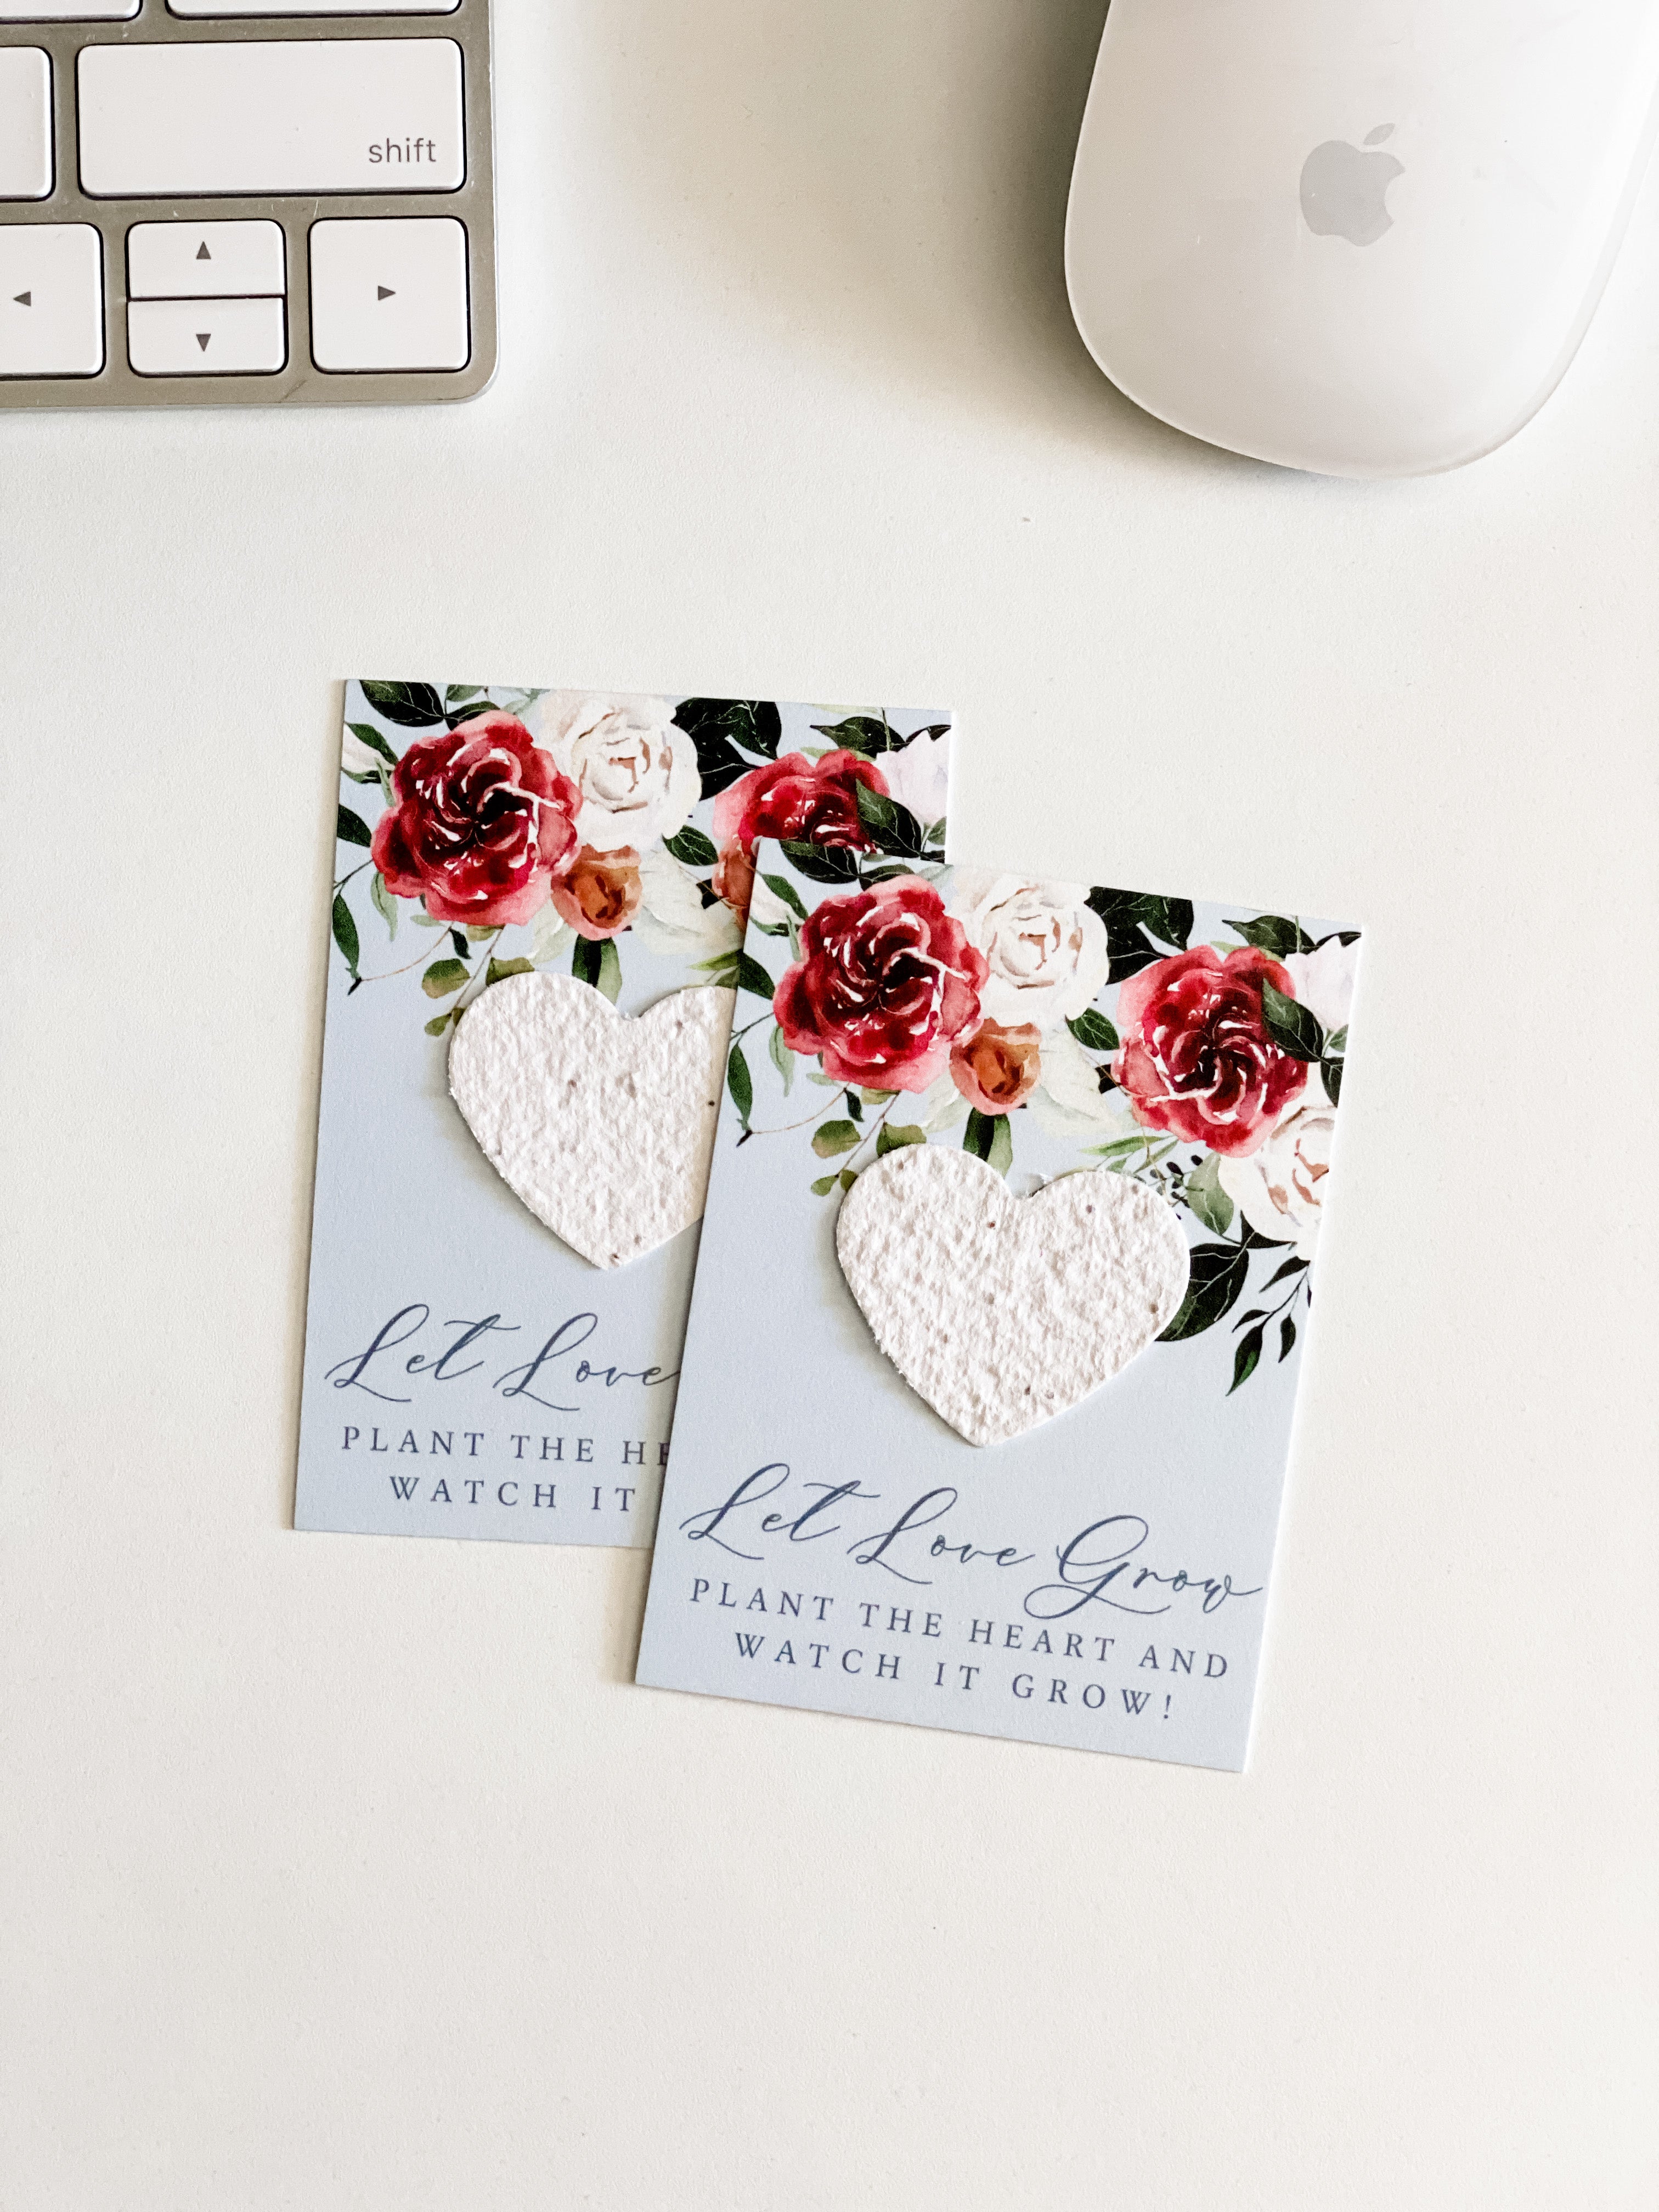 growNOTES™ Wallet Favors - Let Love Grow Original Collection